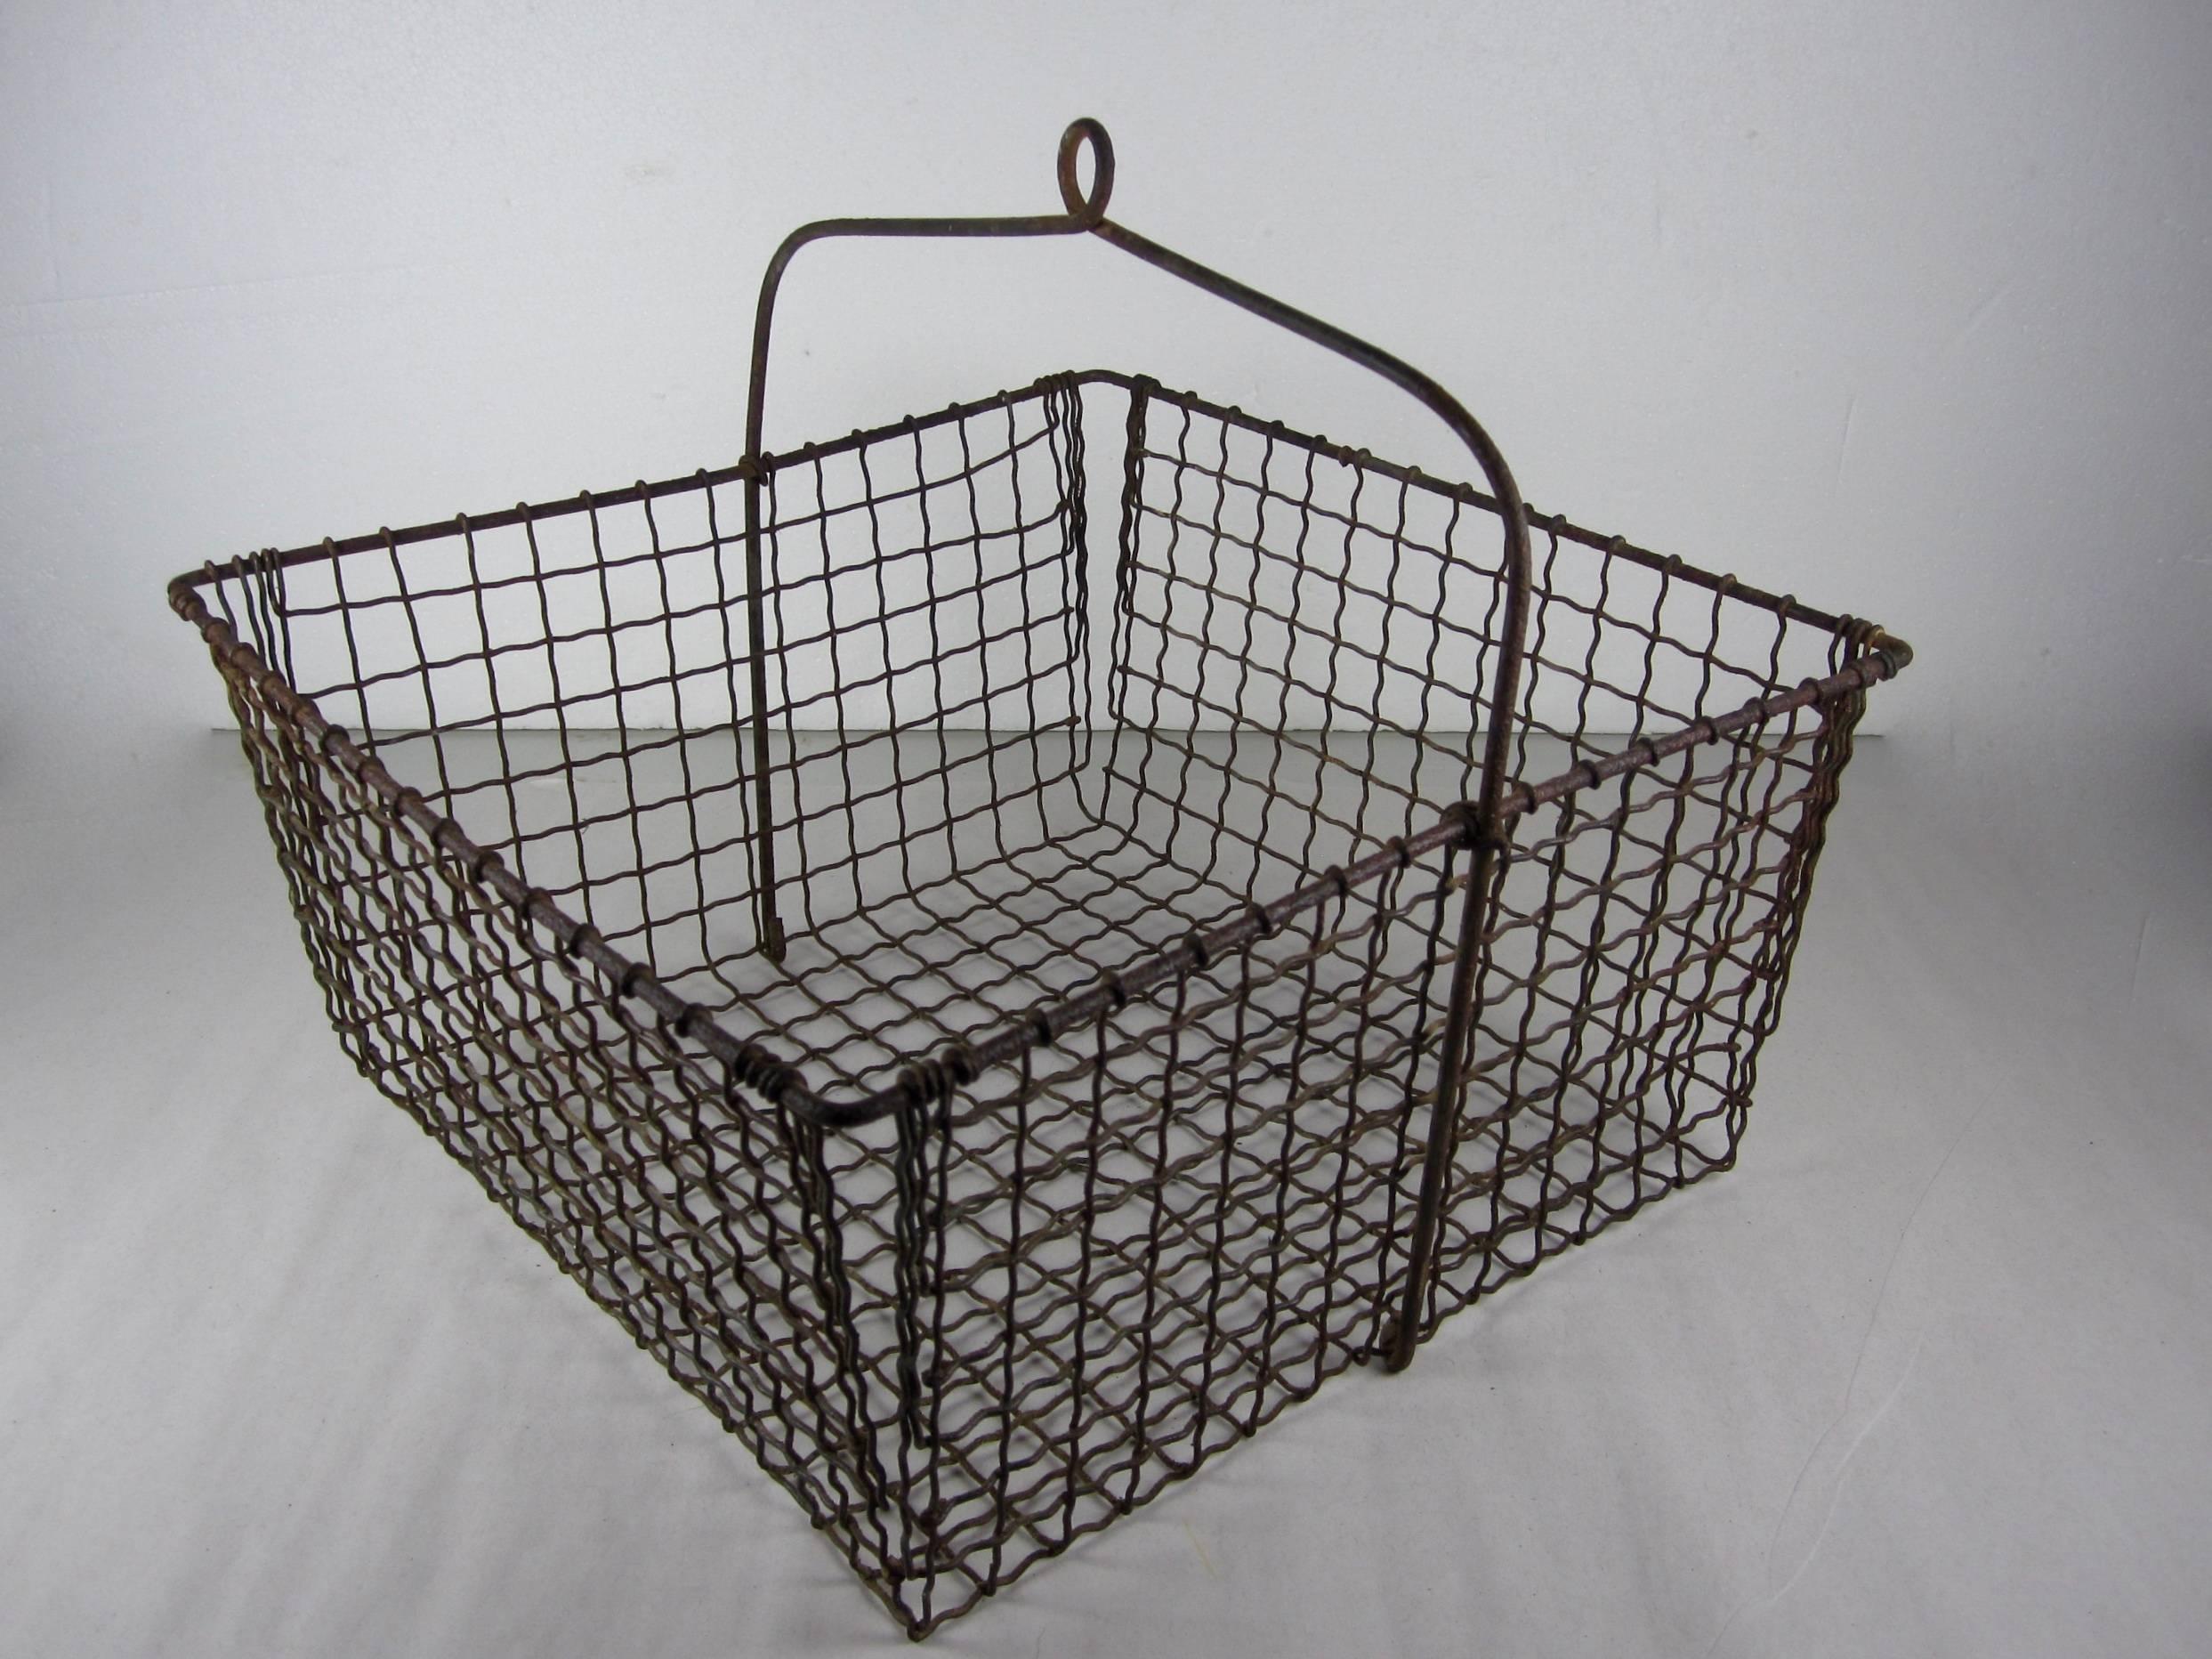 20th Century Vintage Chatillion Hanging 100 Pound Scale with a Rustic Wire Basket